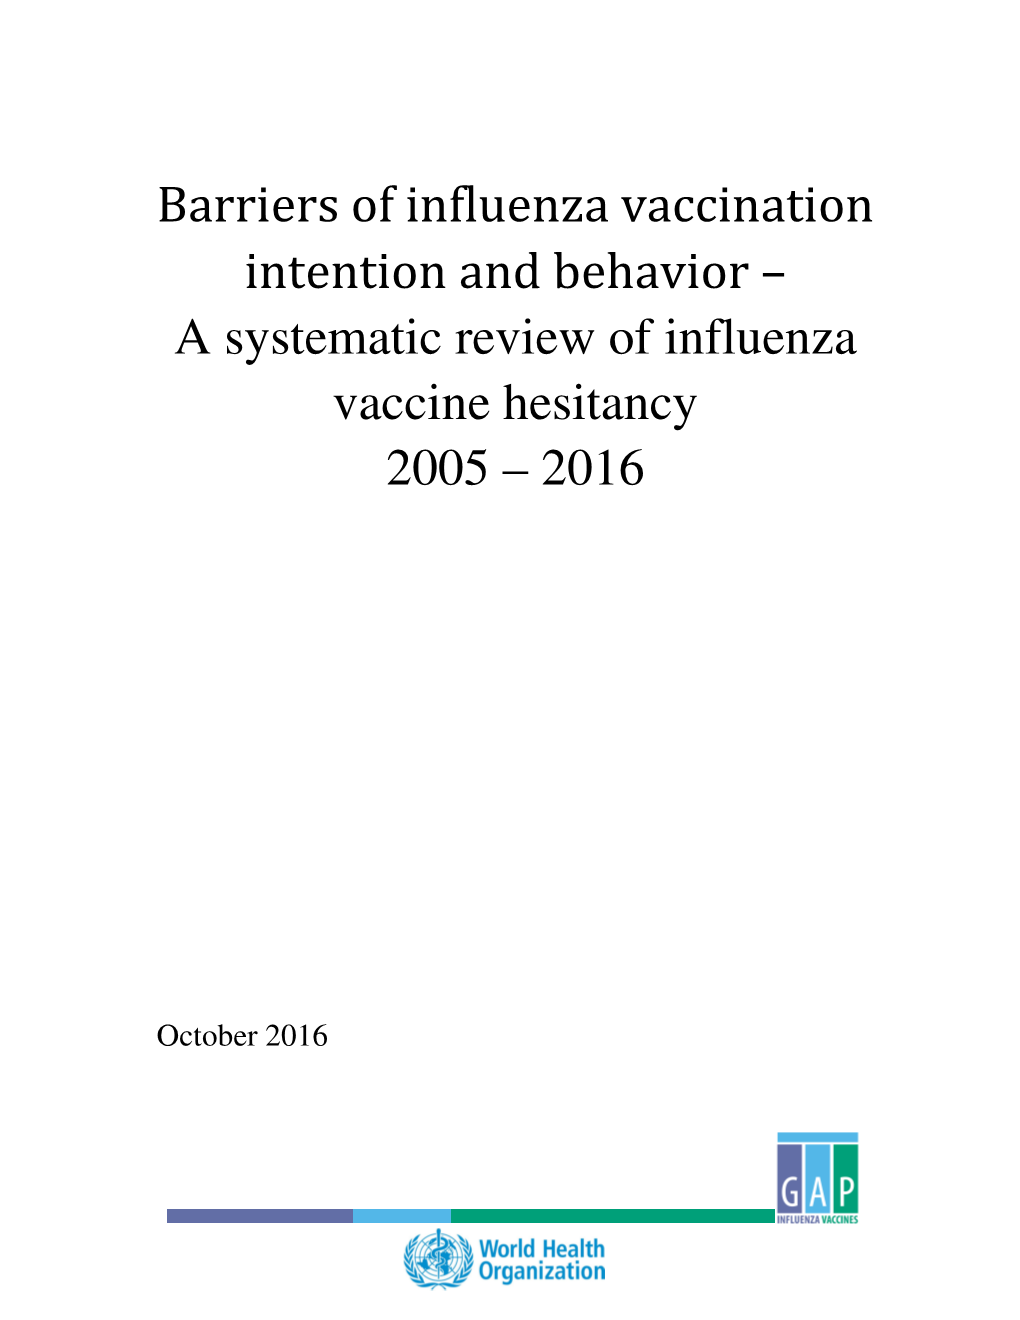 A Systematic Review of Influenza Vaccine Hesitancy 2005 – 2016